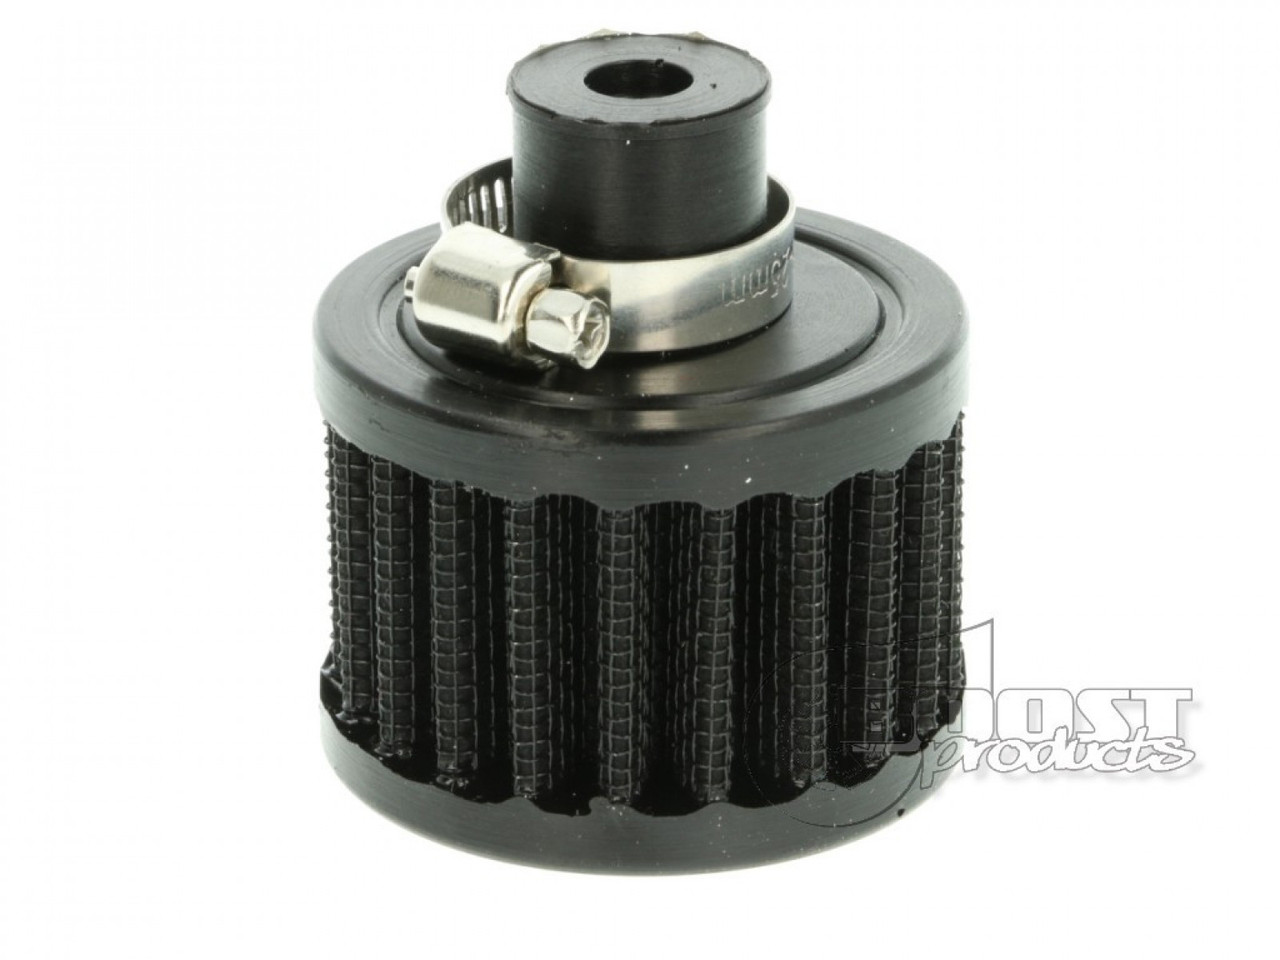 BOOST Products Crankcase Breather Filter with 9mm (3/8") ID Connection, Black (BOP-IN-LU-050-009)